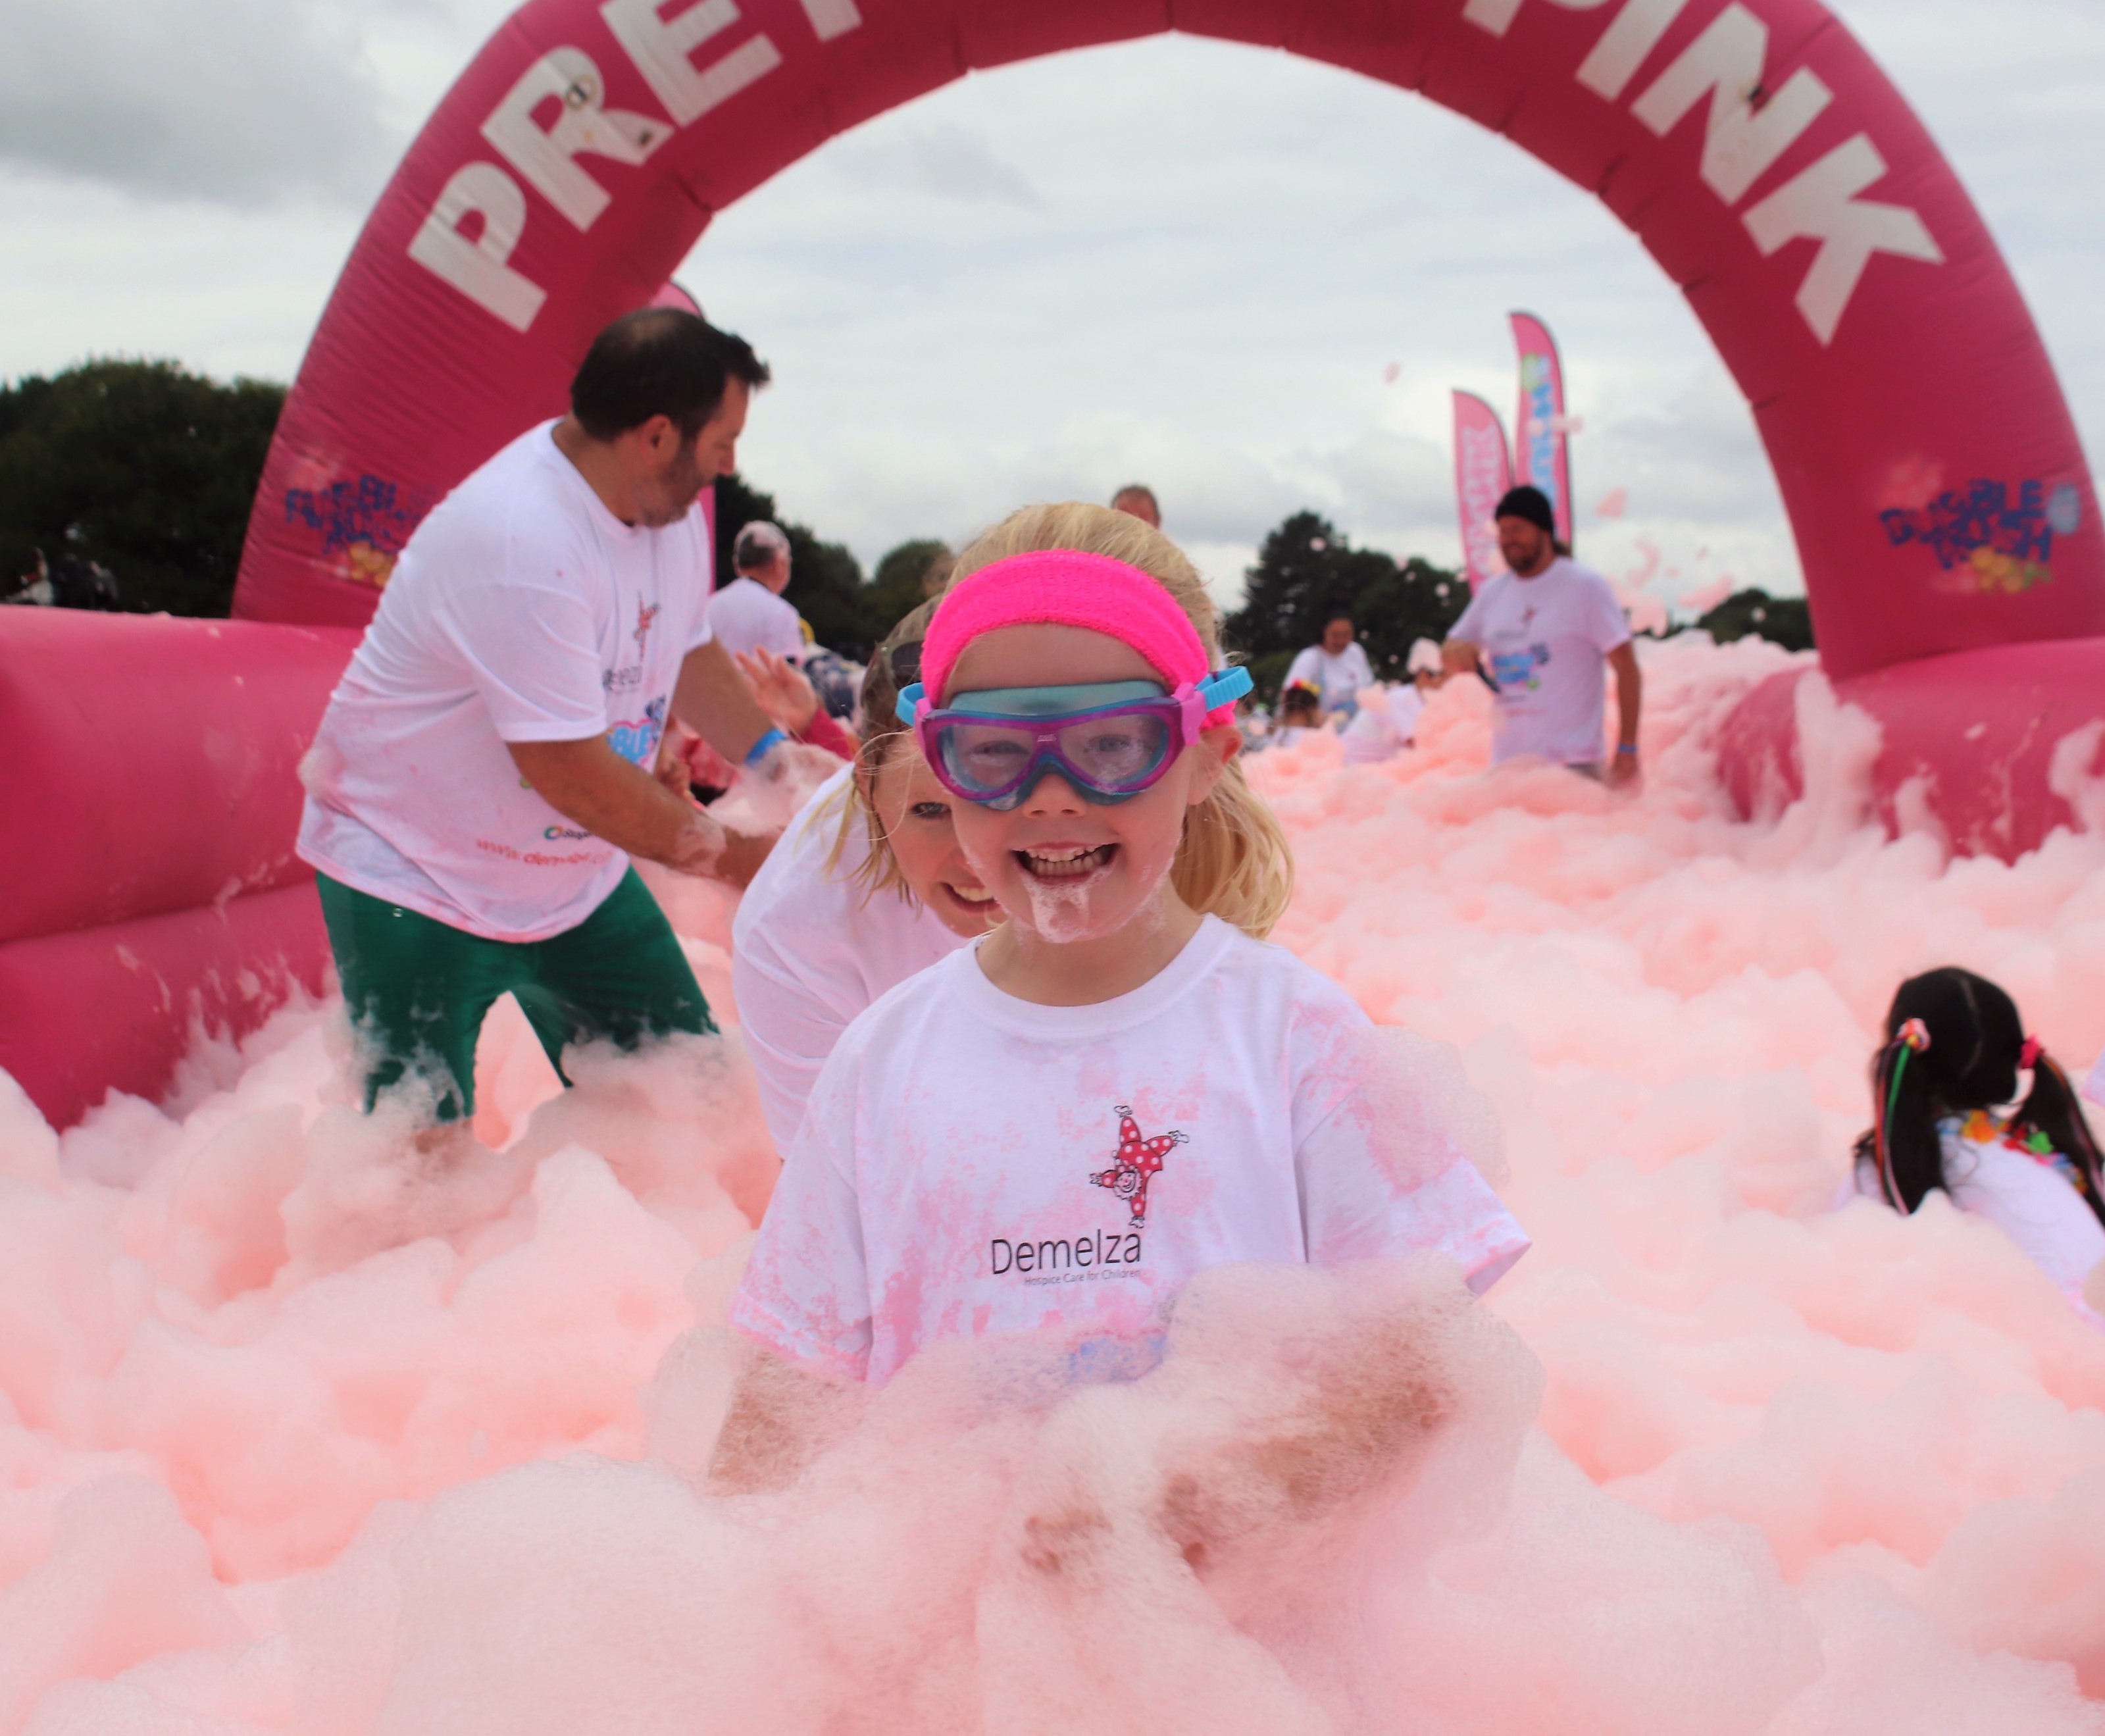 A young girl is standing in a sea of pink bubbles, wearing a pink headband and swimming goggles.